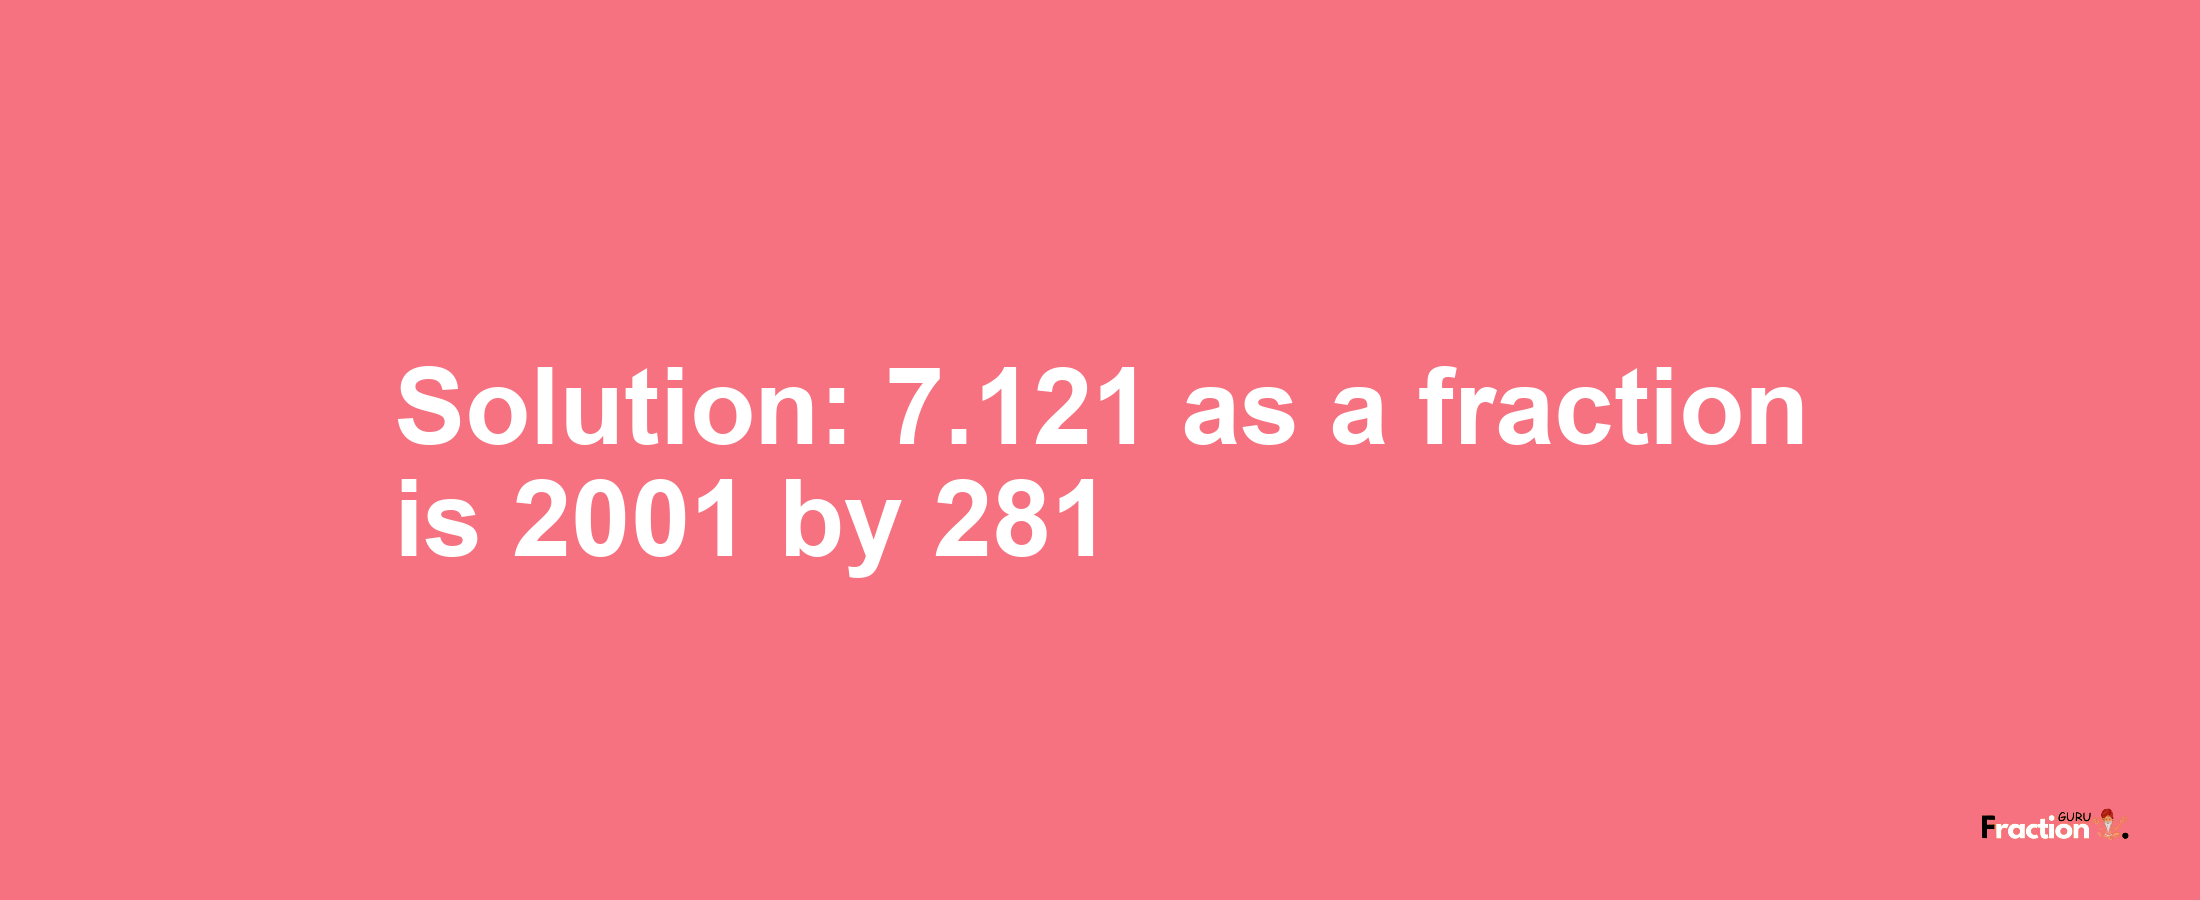 Solution:7.121 as a fraction is 2001/281